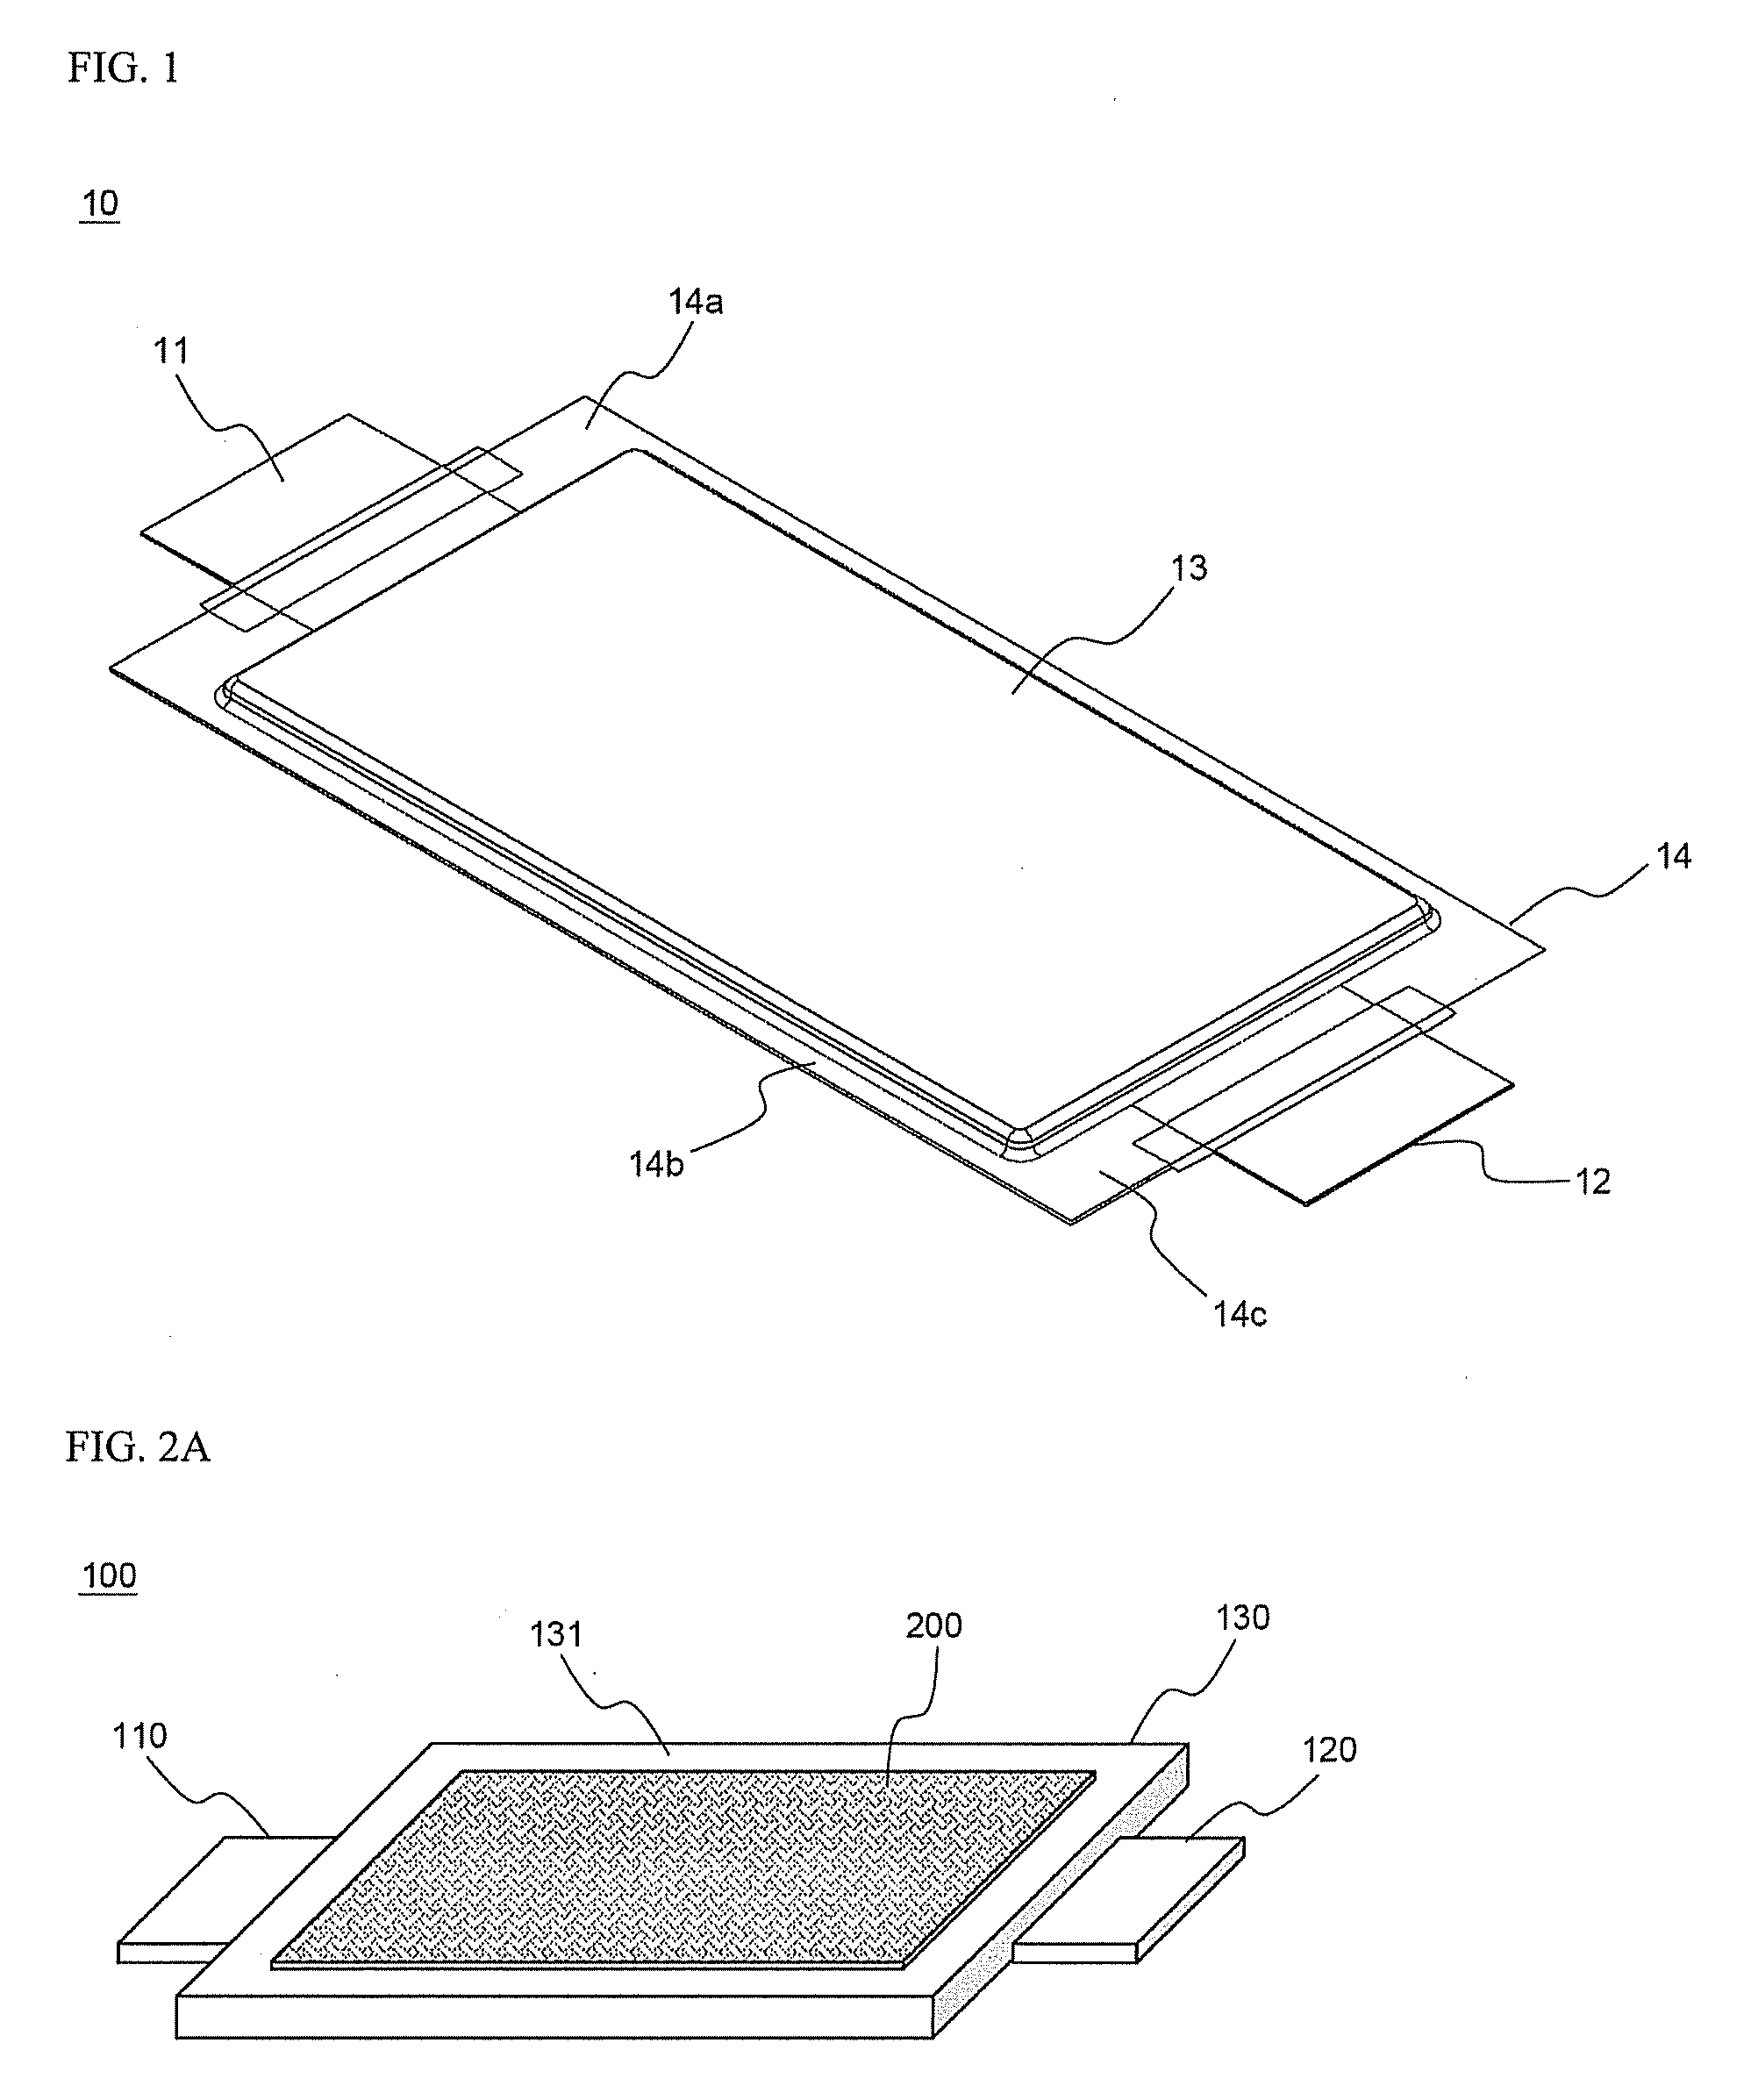 Battery module having the attachment members between battery cells